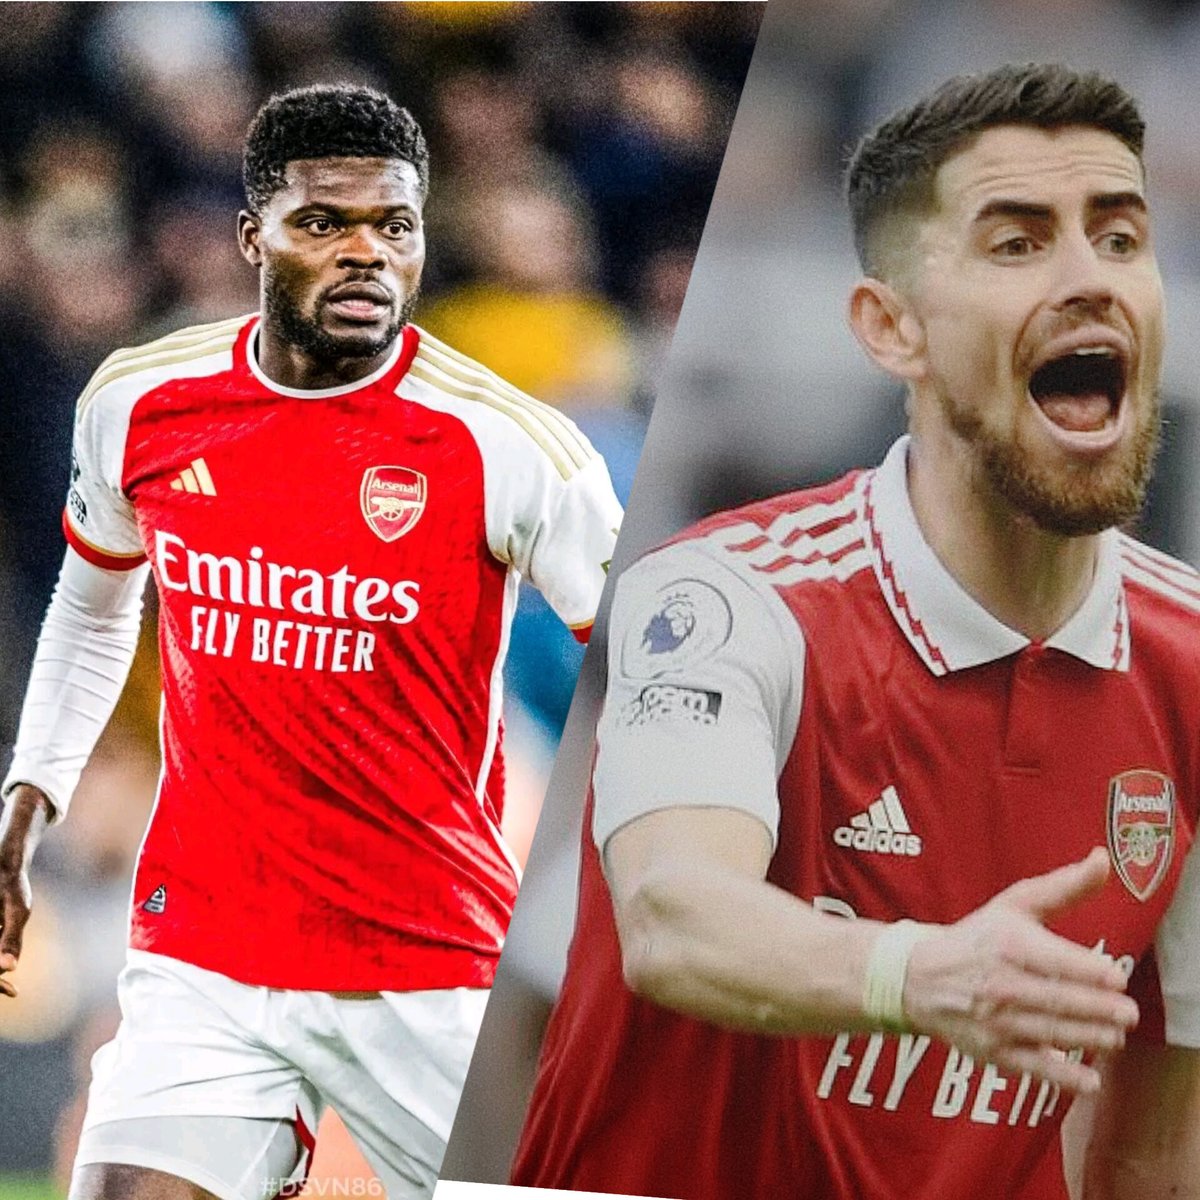 🚨Coach Mikel Arteta will face a huge challenge to choose between Thomas Partey and Jorginho in our next games. 🔸️Thomas Partey is playing great, but Jorginho is at his form. 🔸️With Jorginho Frello, Arsenal has an advantage against teams that sit deep, and with Thomas